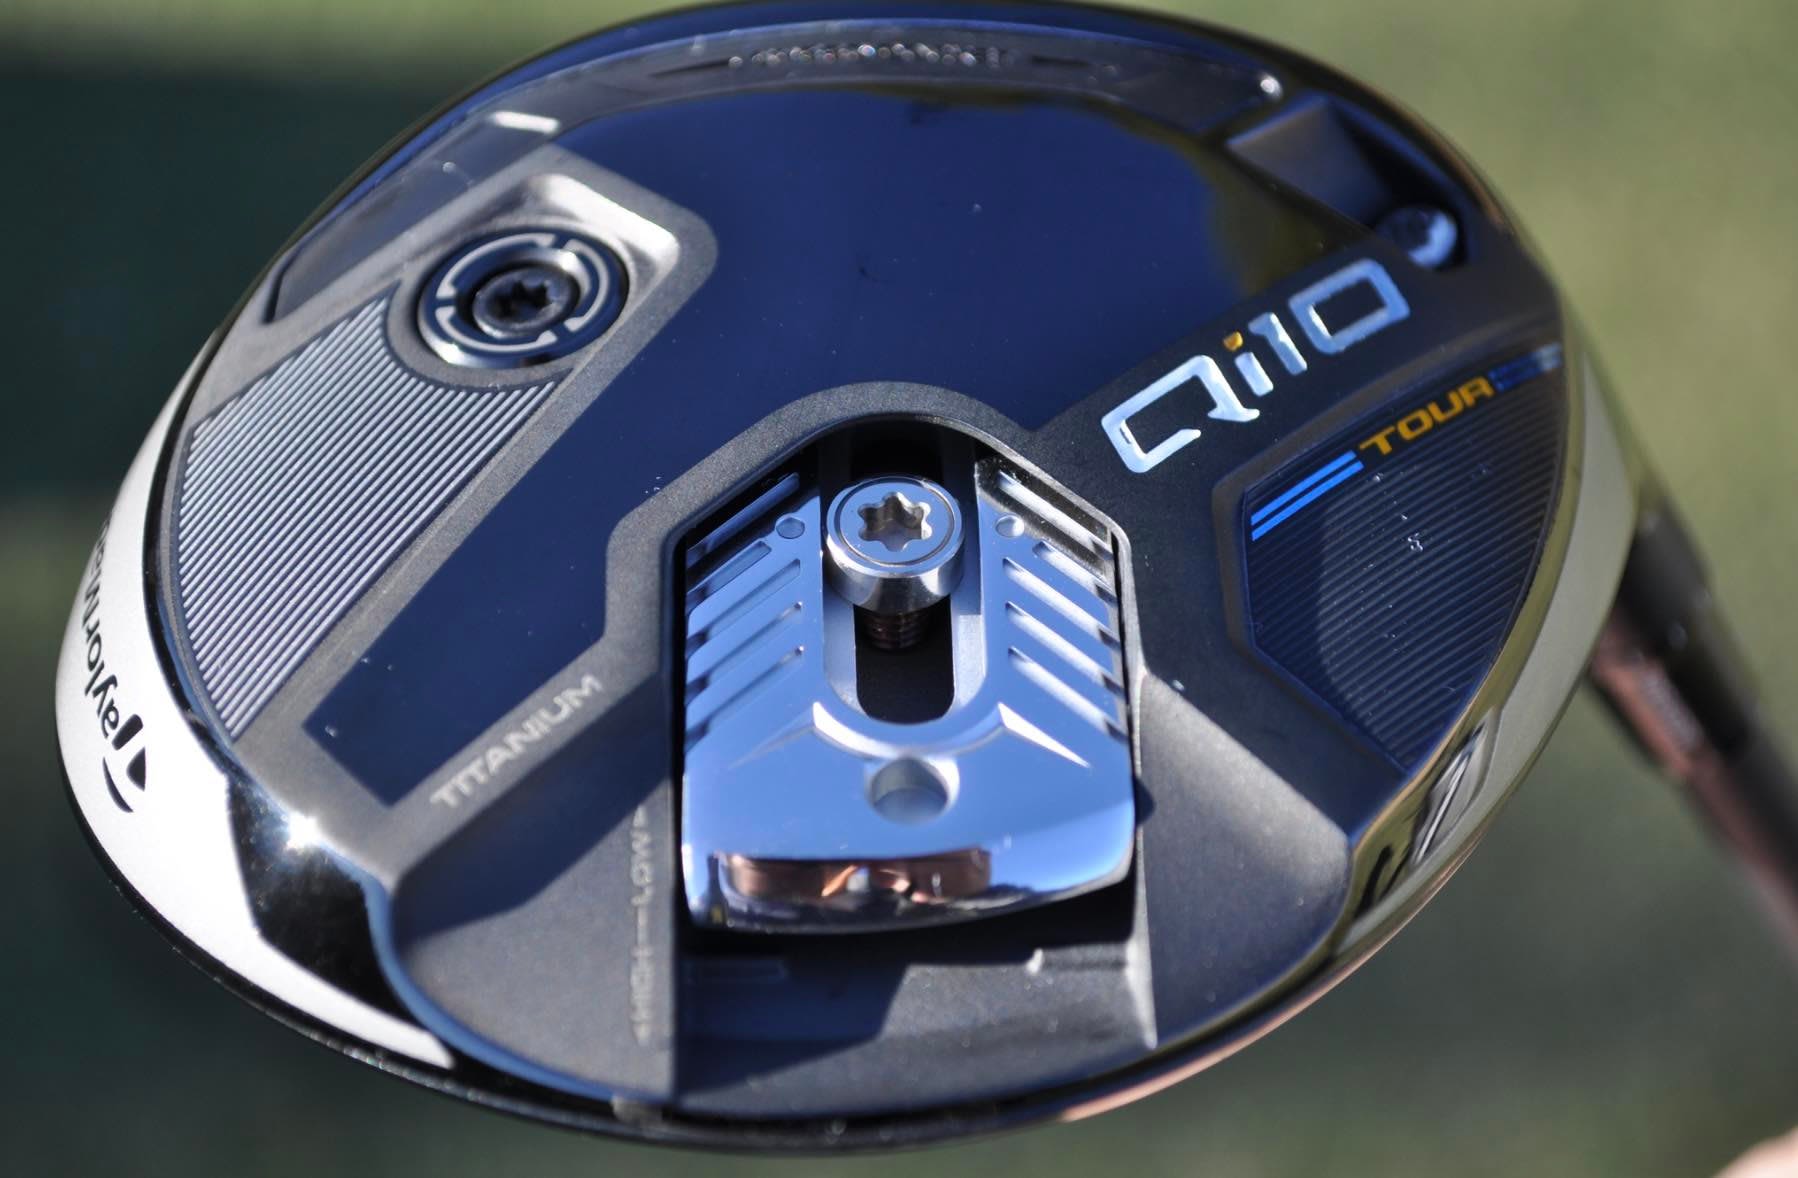 Robot testing verifies these fairway woods have exceptionally low launch